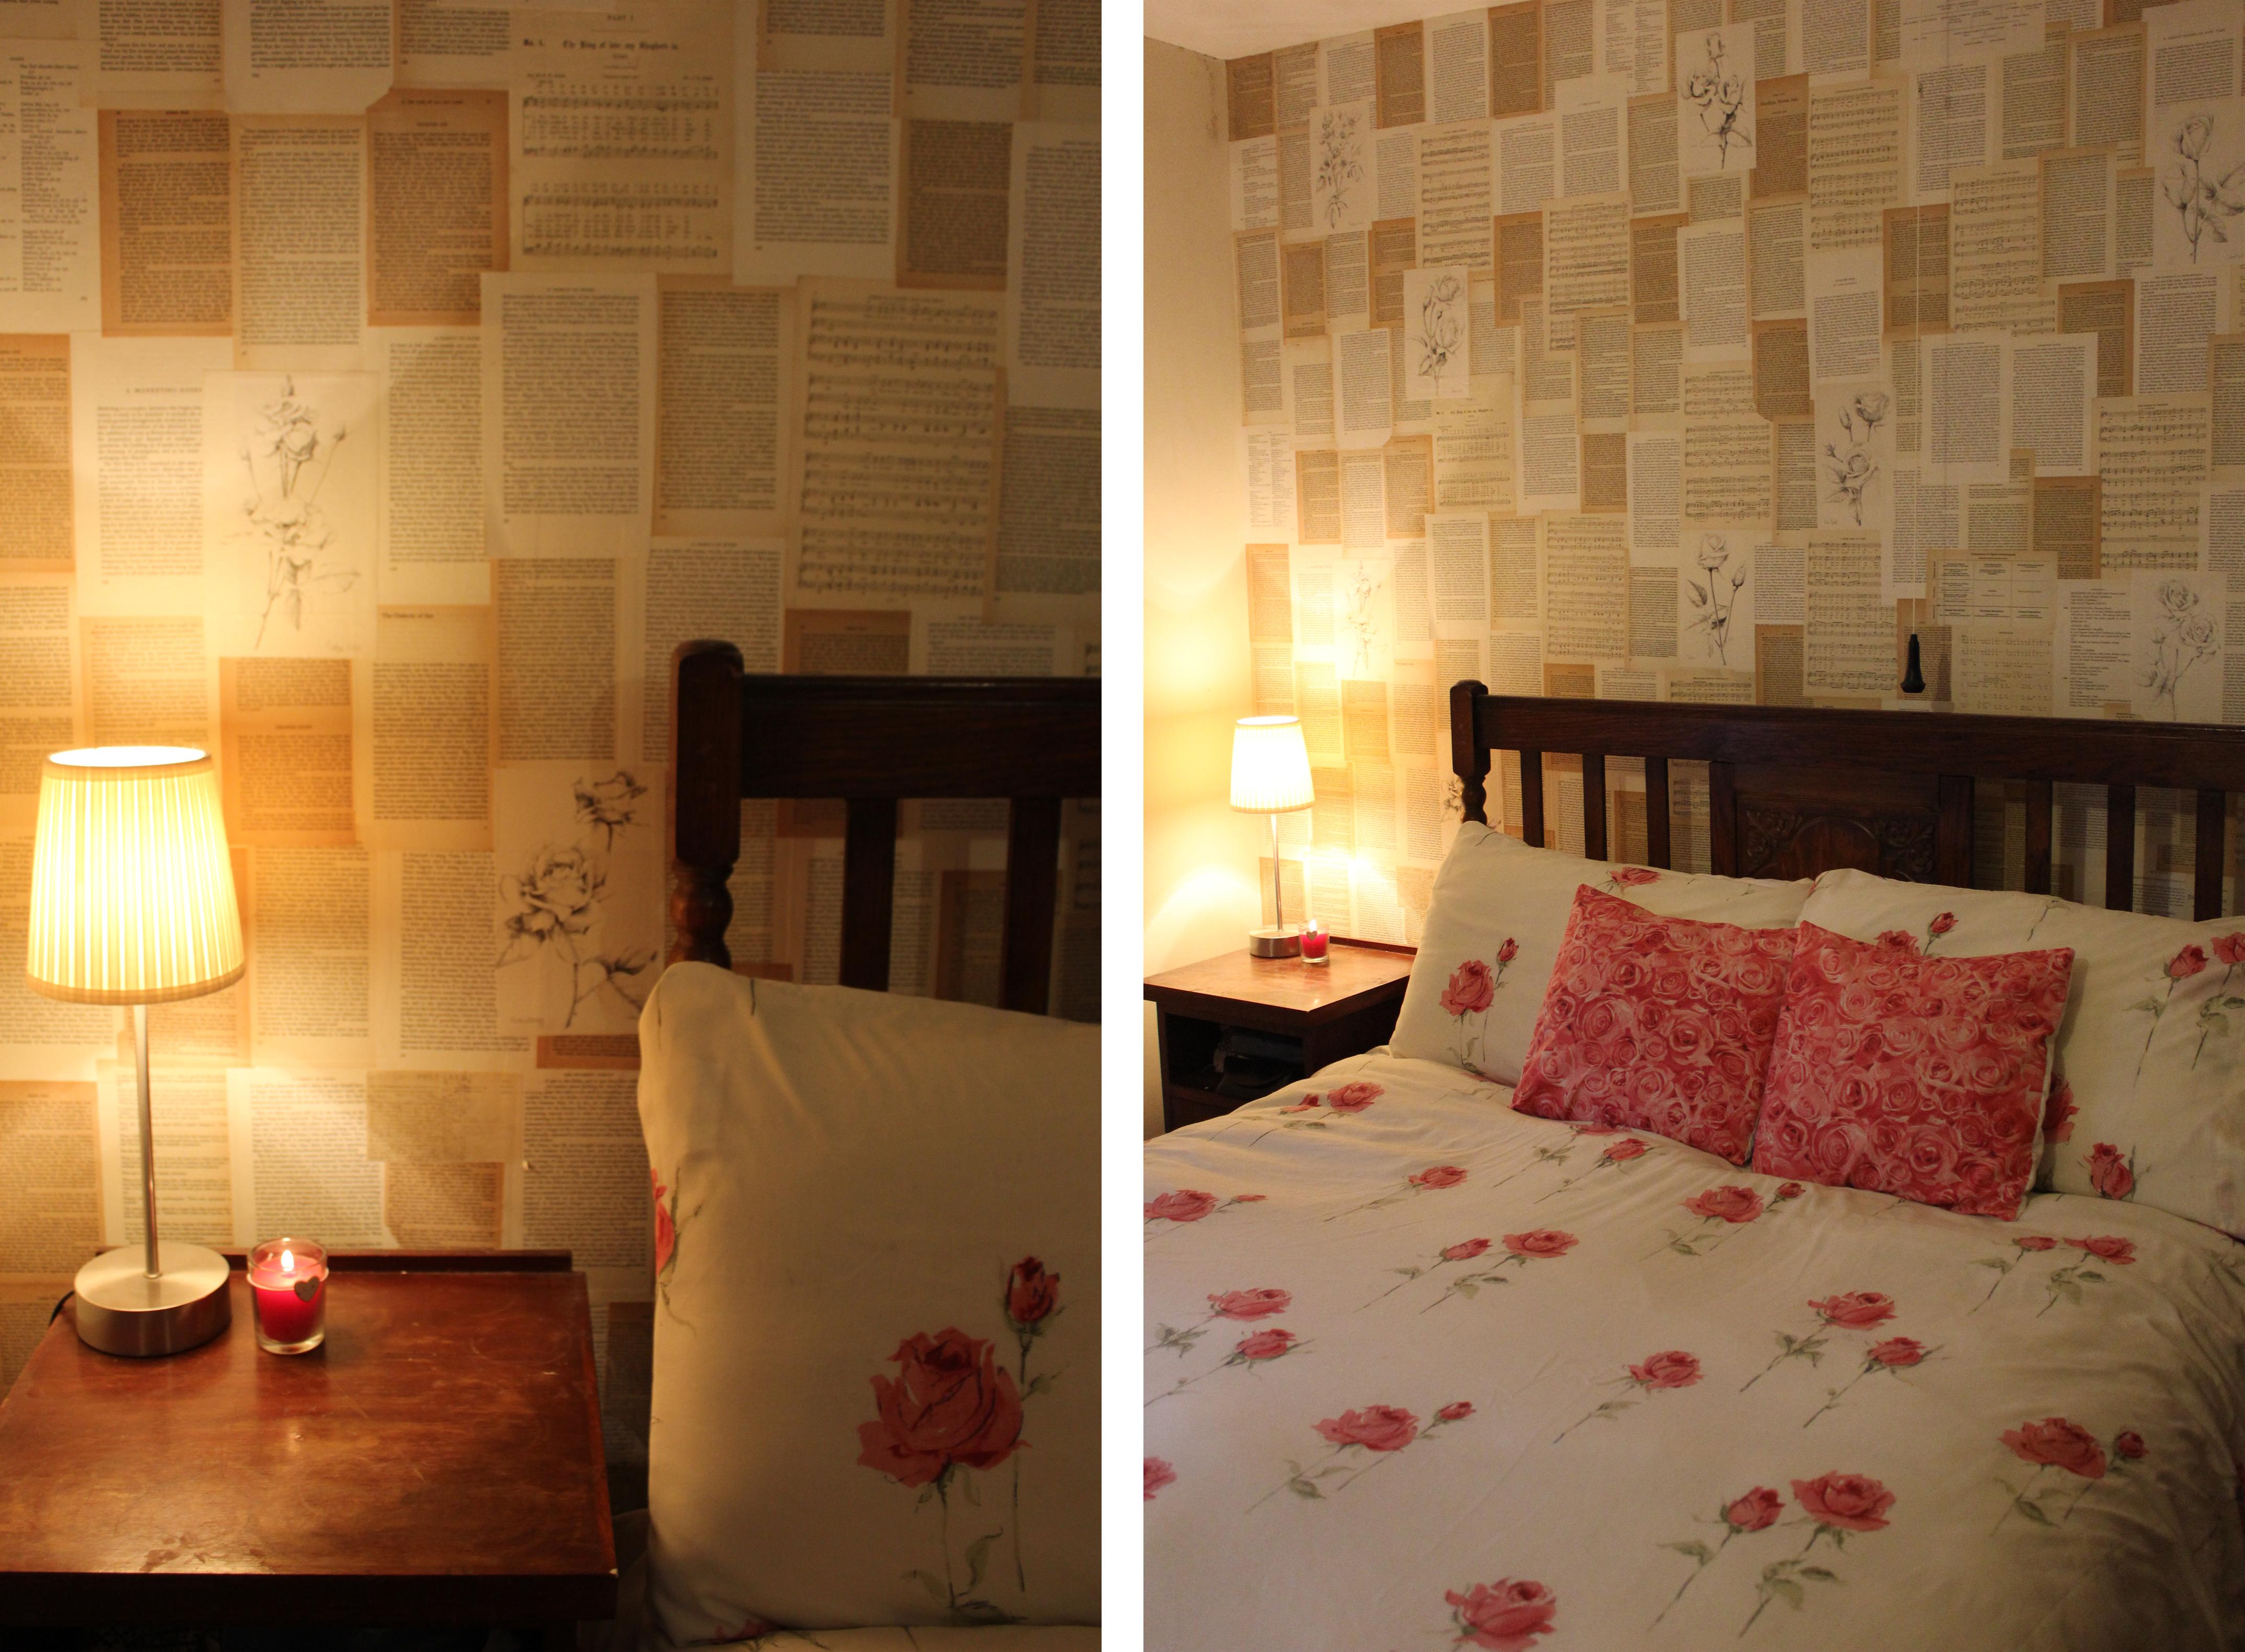 DIY bedroom makeover with old book pages and roses